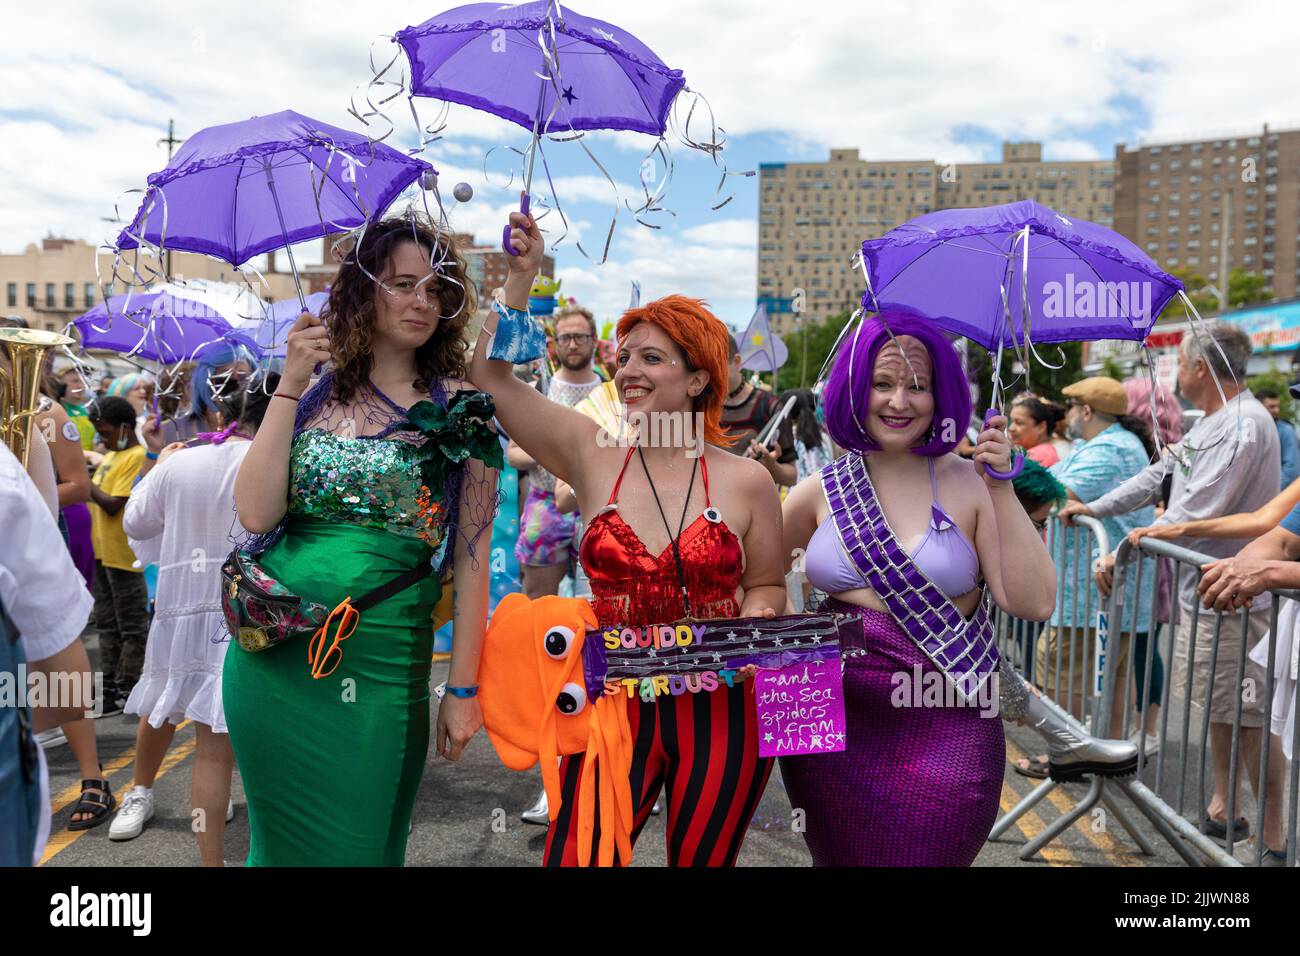 A closeup of women wearing shiny outfits with umbrellas at the 40th Annual Mermaid Parade in Coney Island Stock Photo